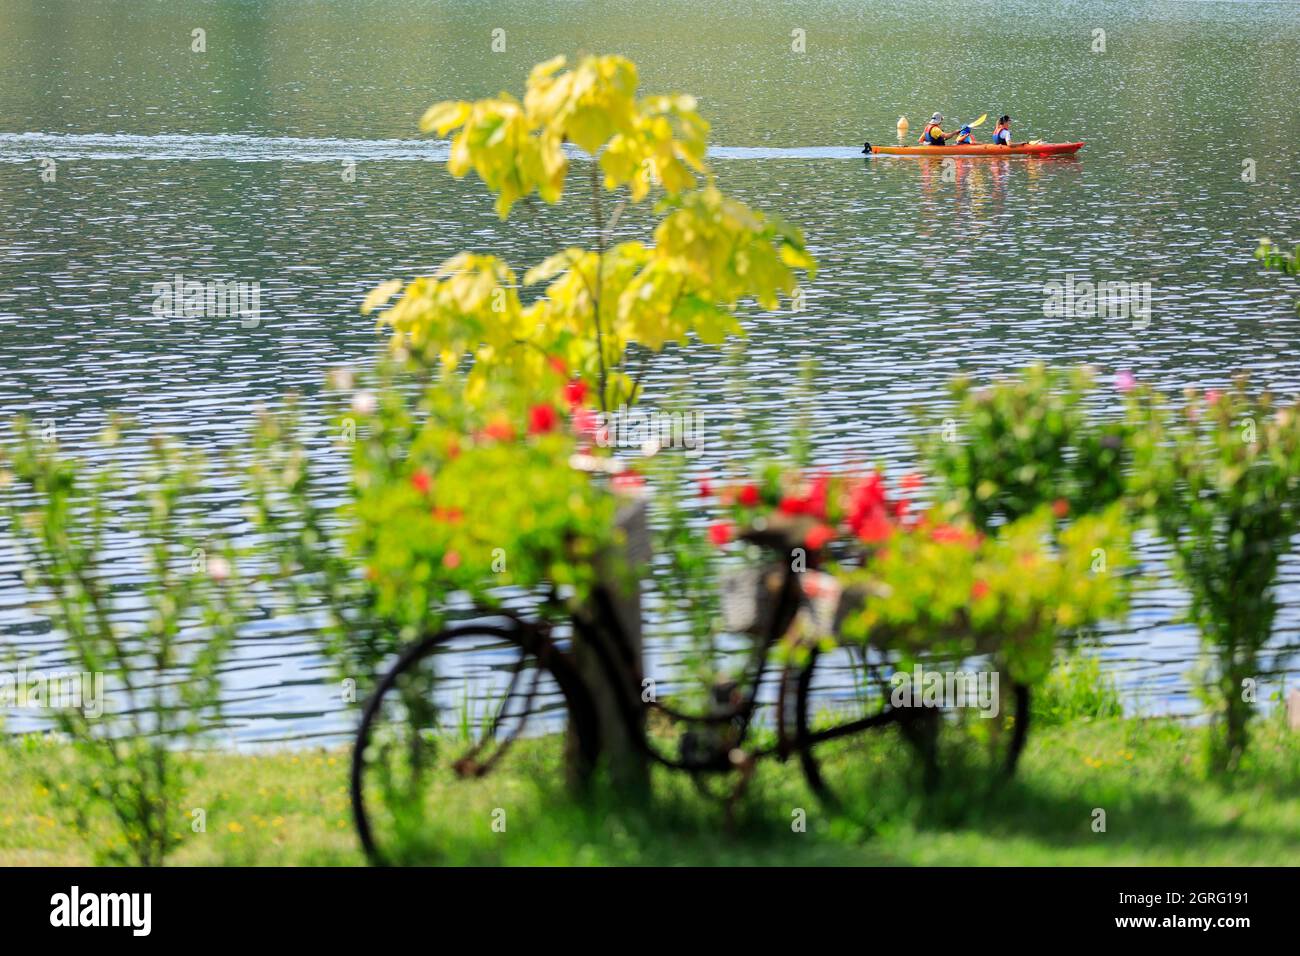 France, Ain, Massignieu de Rives, lake of Lit au Roi on the Rhone river, bicycle Stock Photo